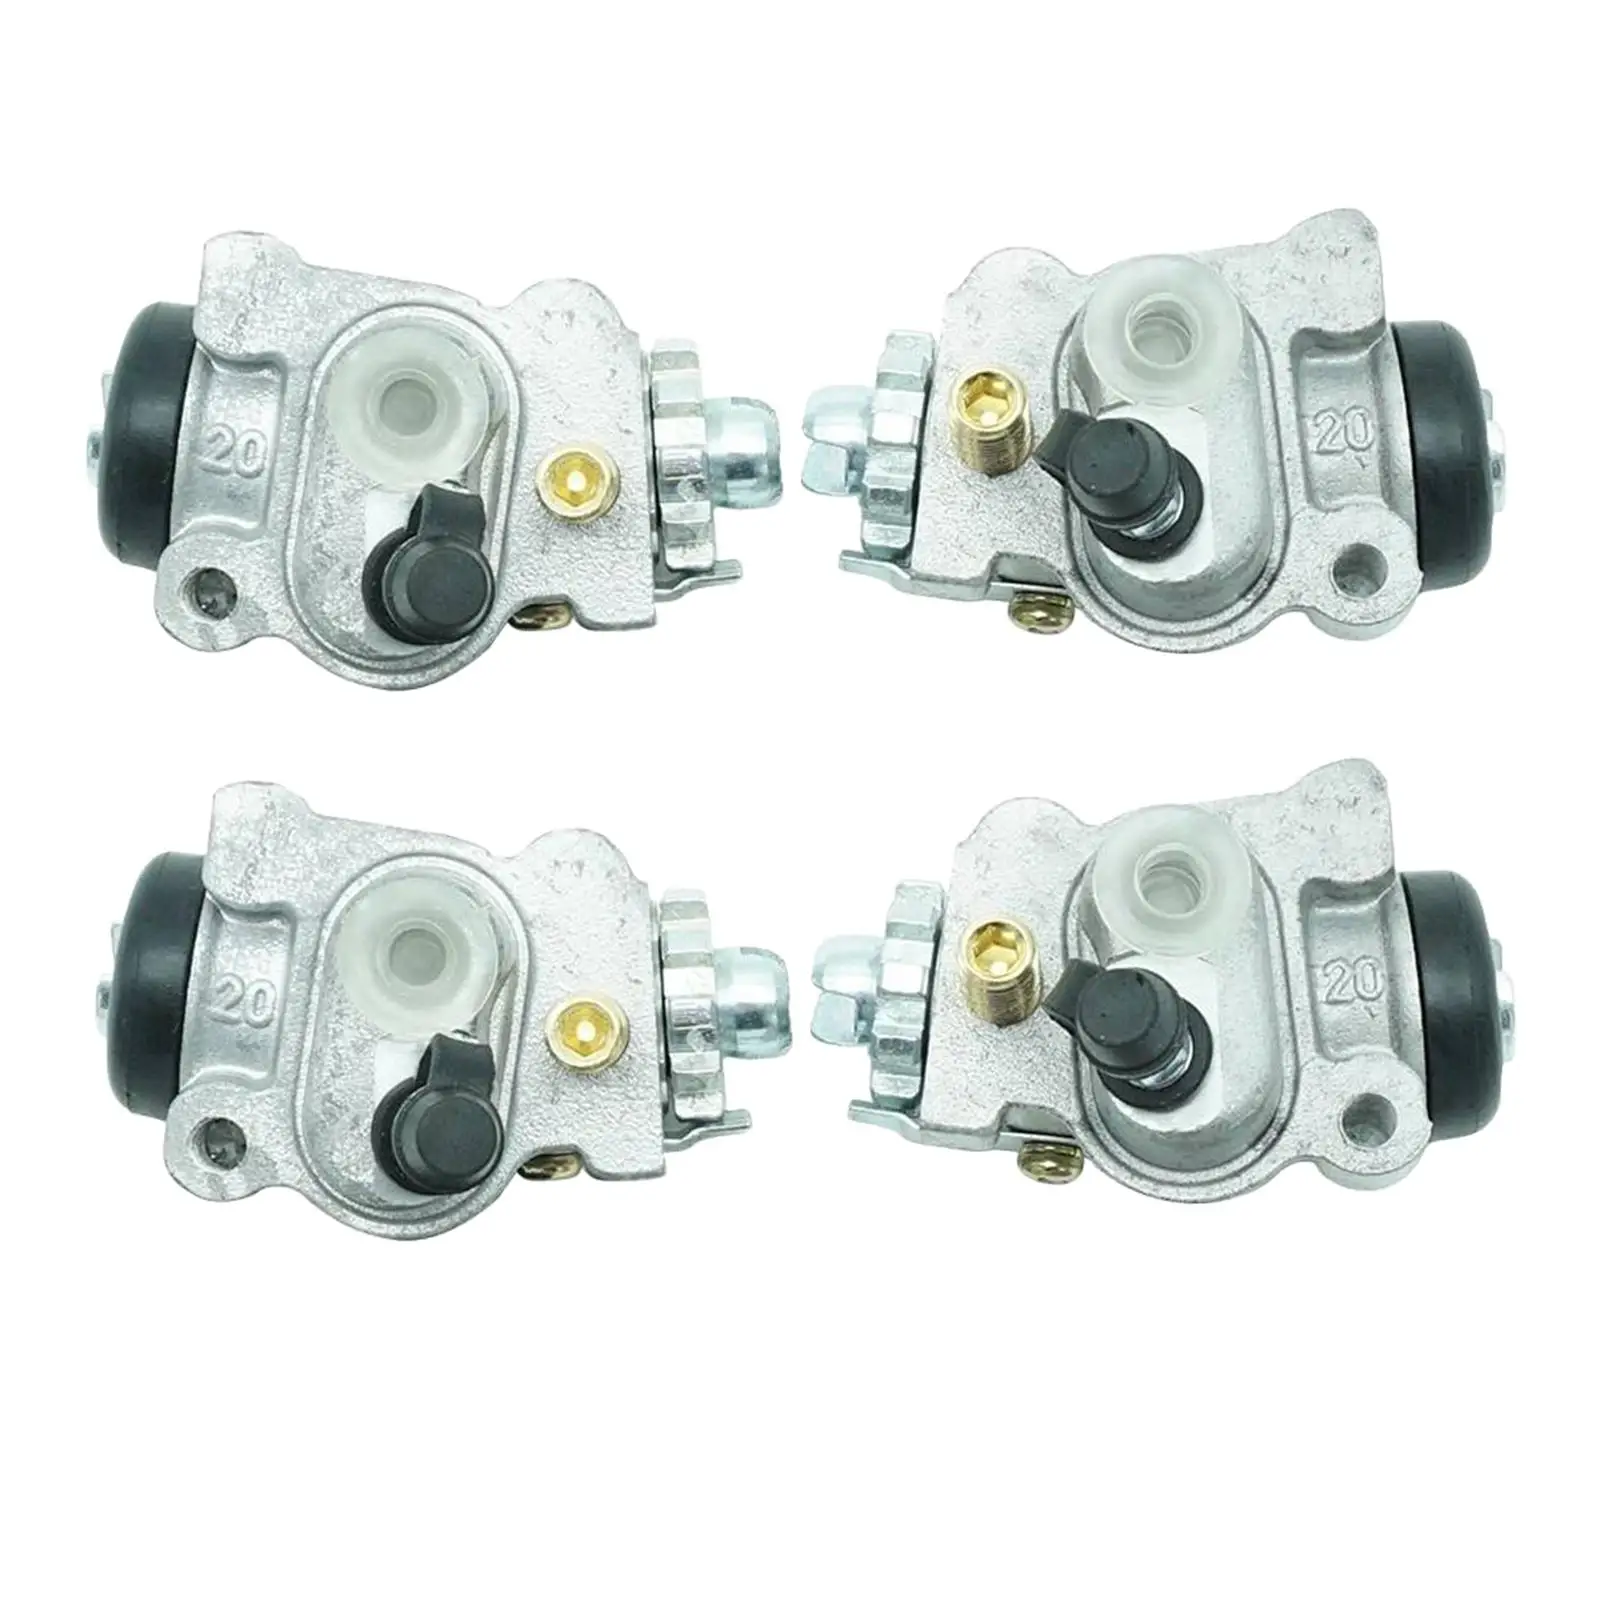 4x Front Brake Wheel Cylinders for Honda Foreman 450 Replaces Parts